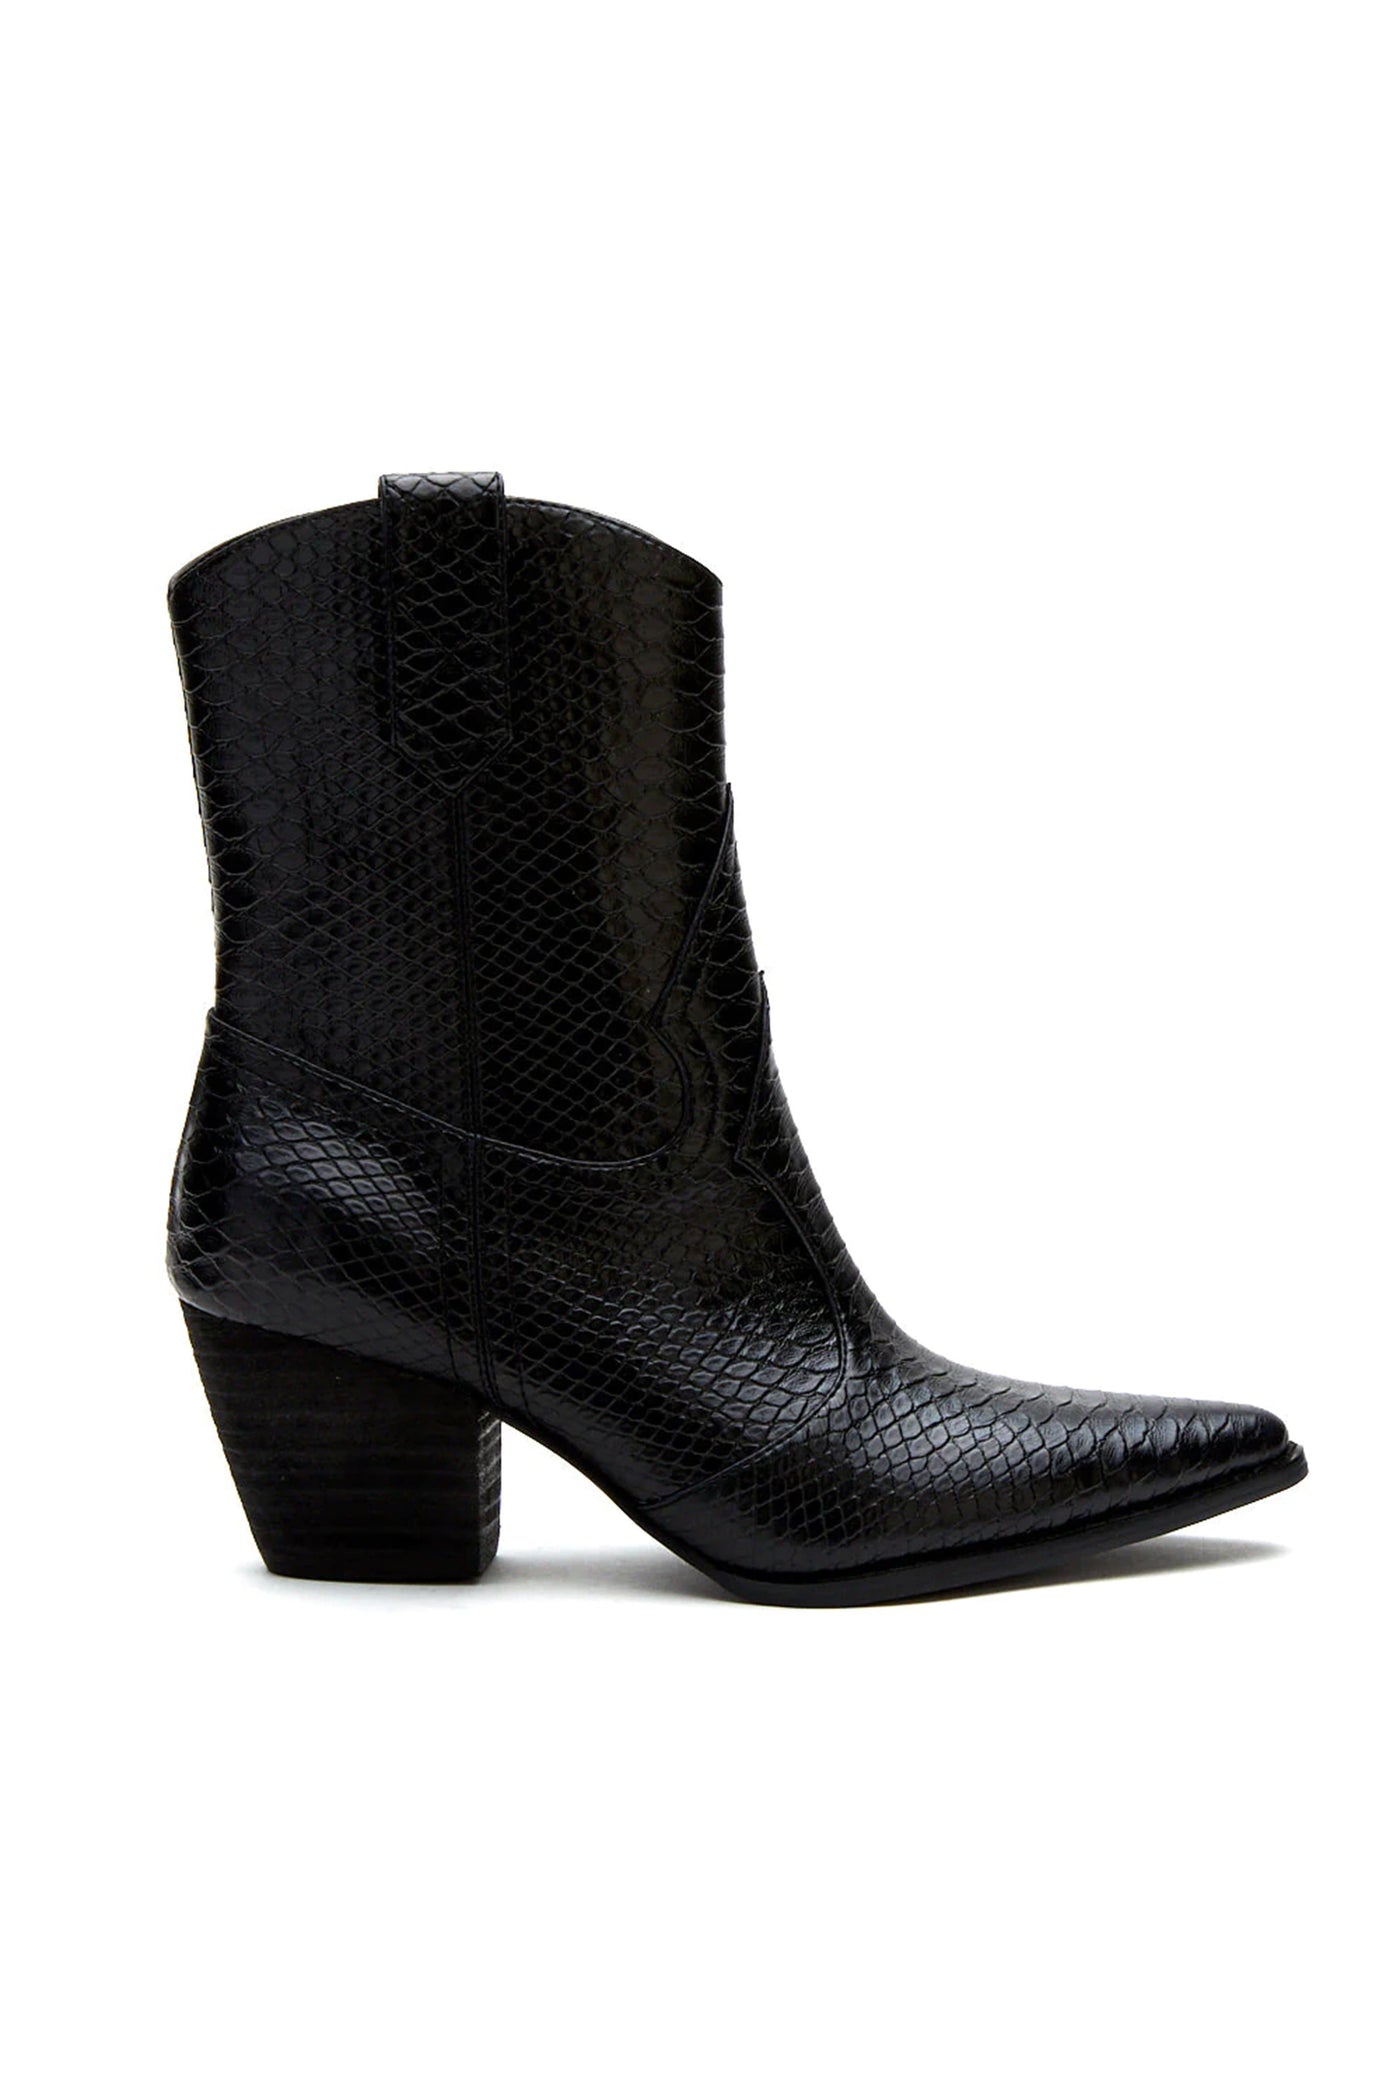 Coconuts By Matisse Bambi Black Western Boot